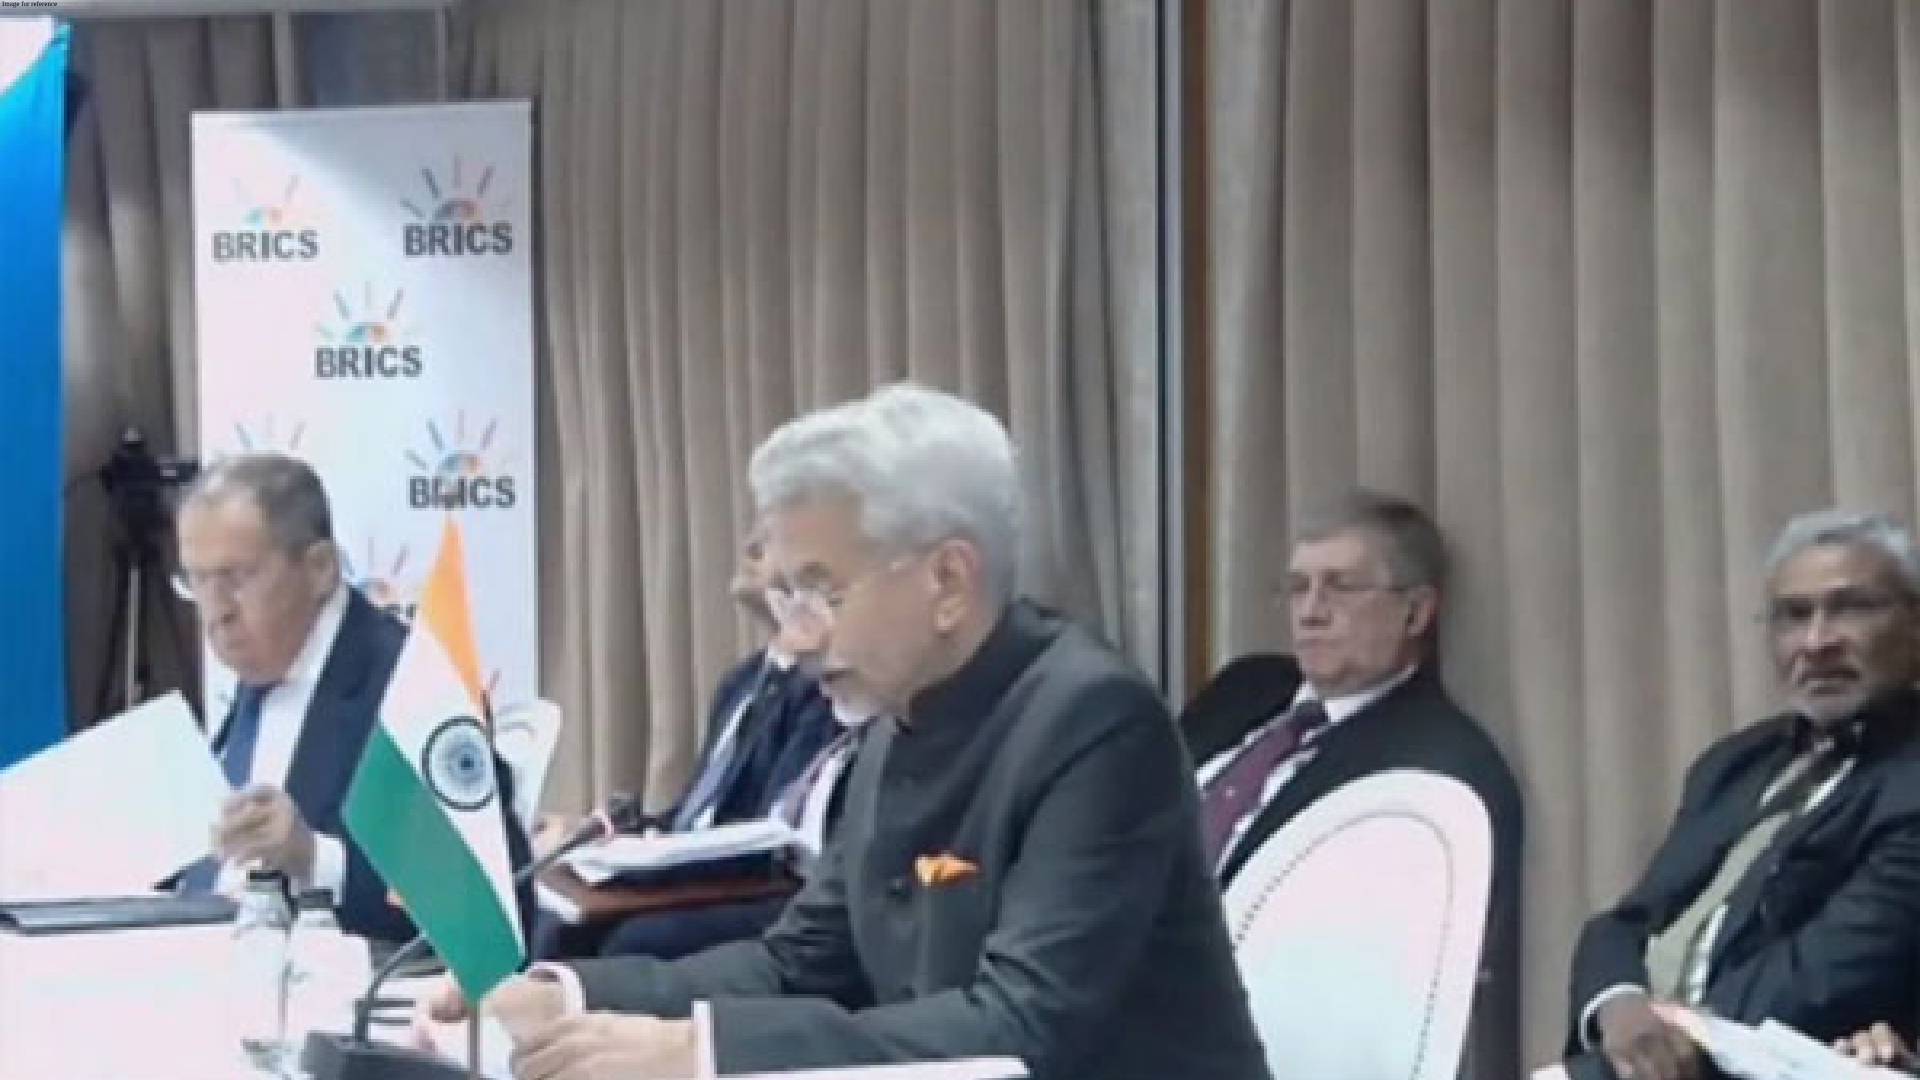 Participation in BRICS meeting to mark India's inaugural foreign policy engagement in PM Modi's third term